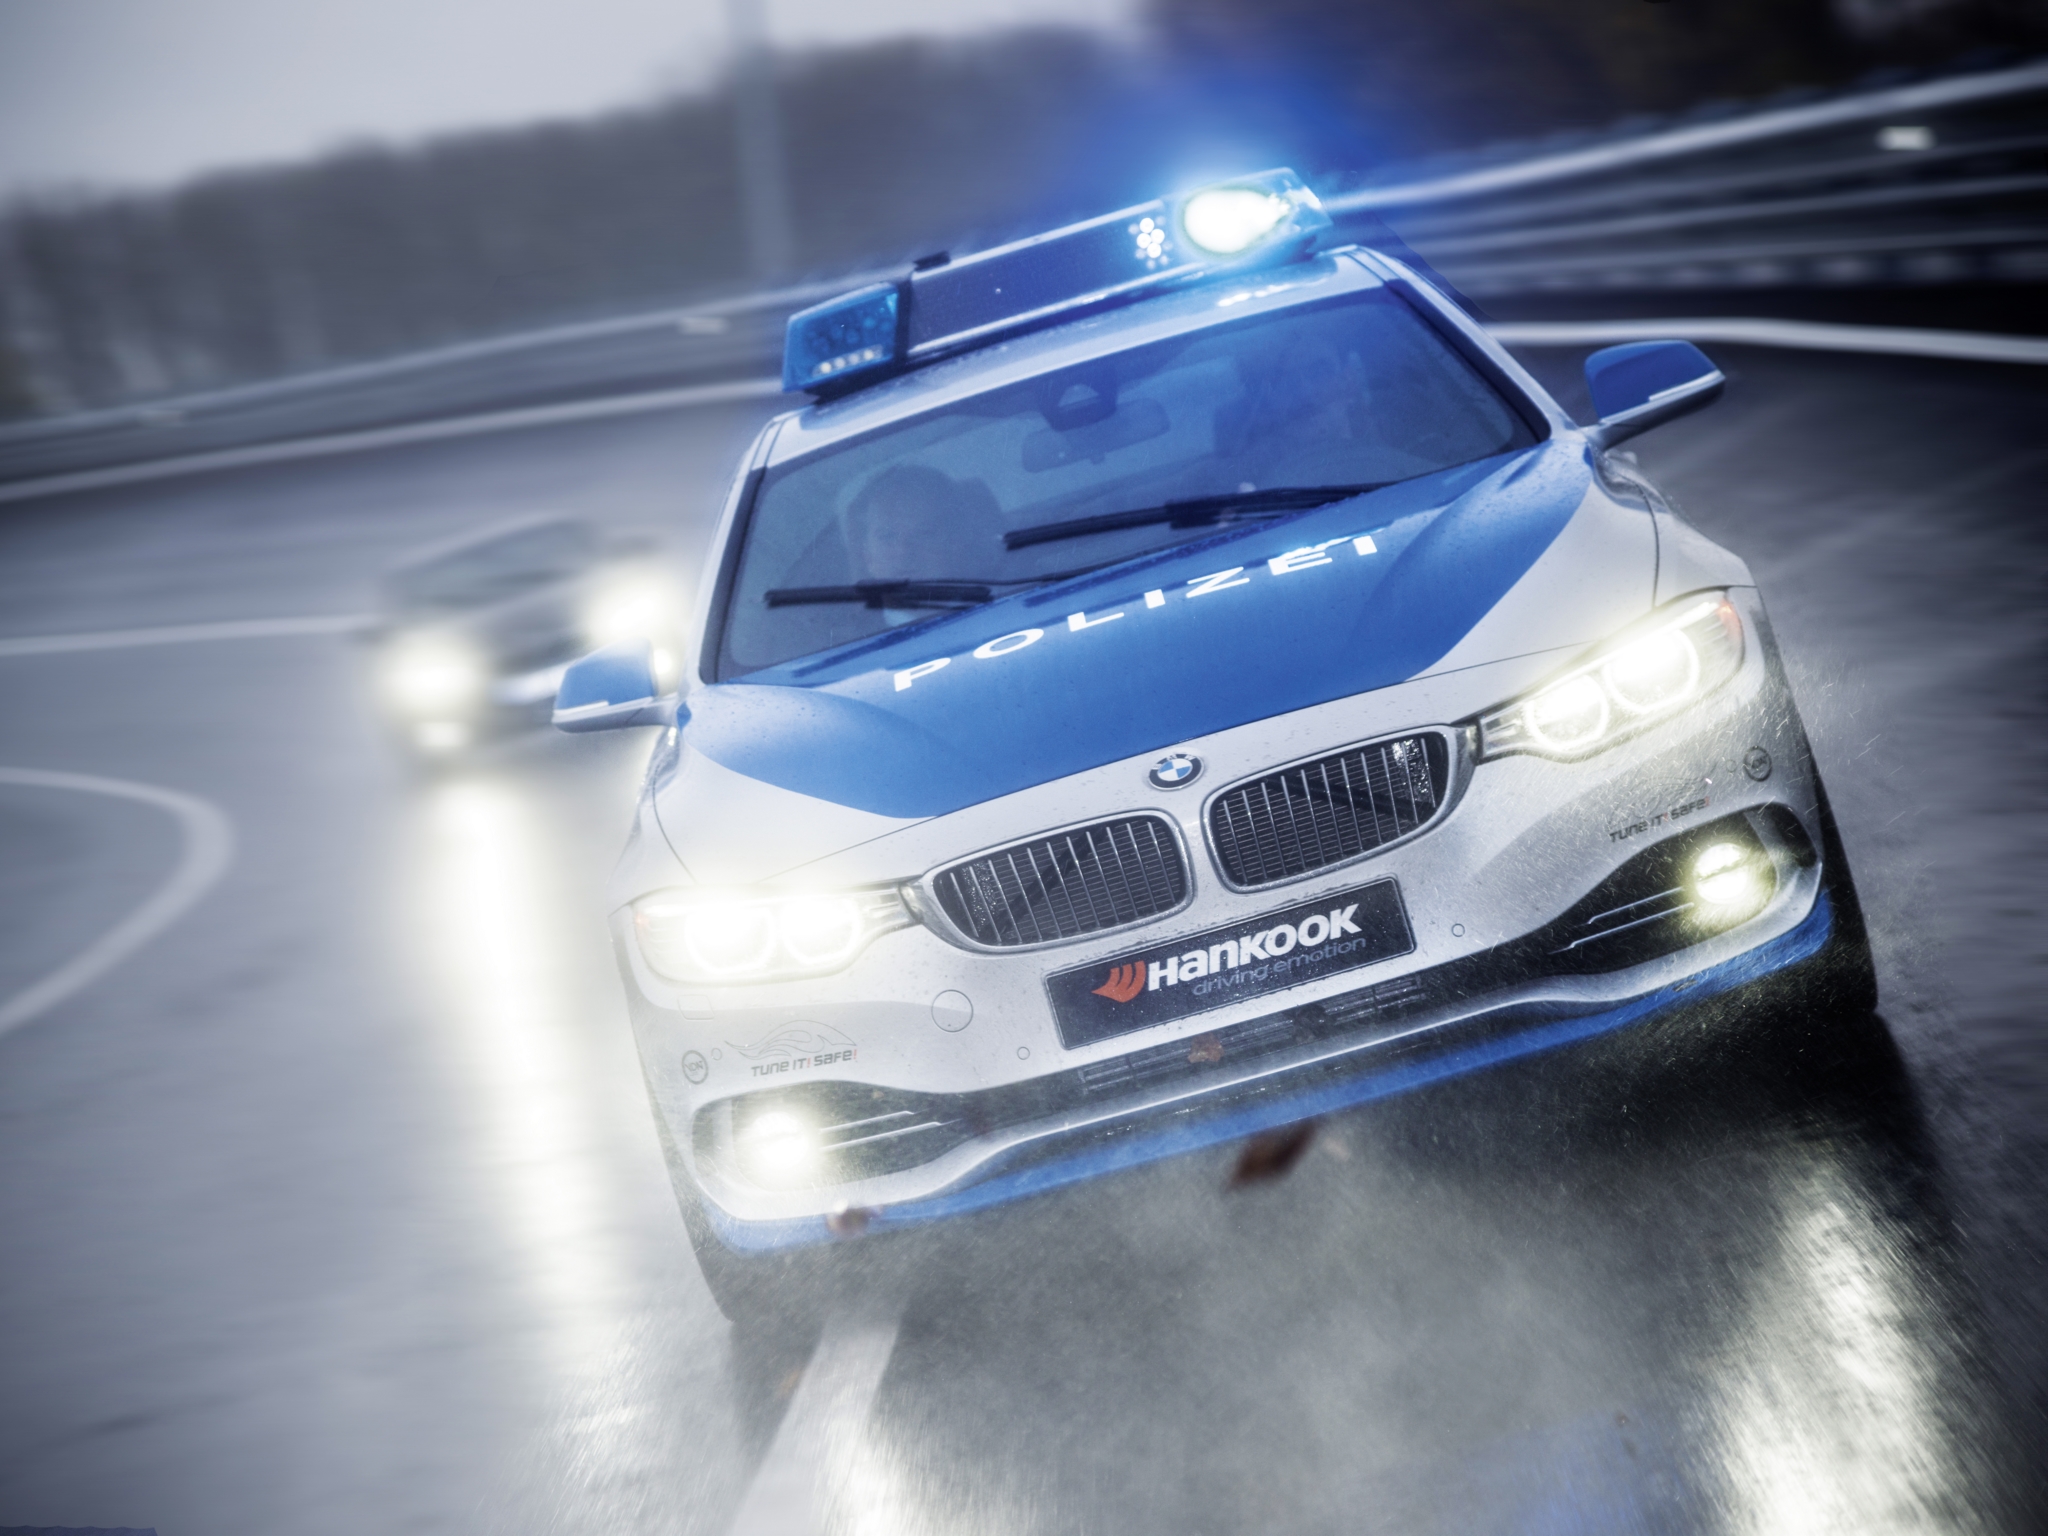 2013, Ac schnitzer, Bmw, Acs4, Coupe, Polizei, Concept,  f32 , Tuning, Police, Emergency Wallpaper